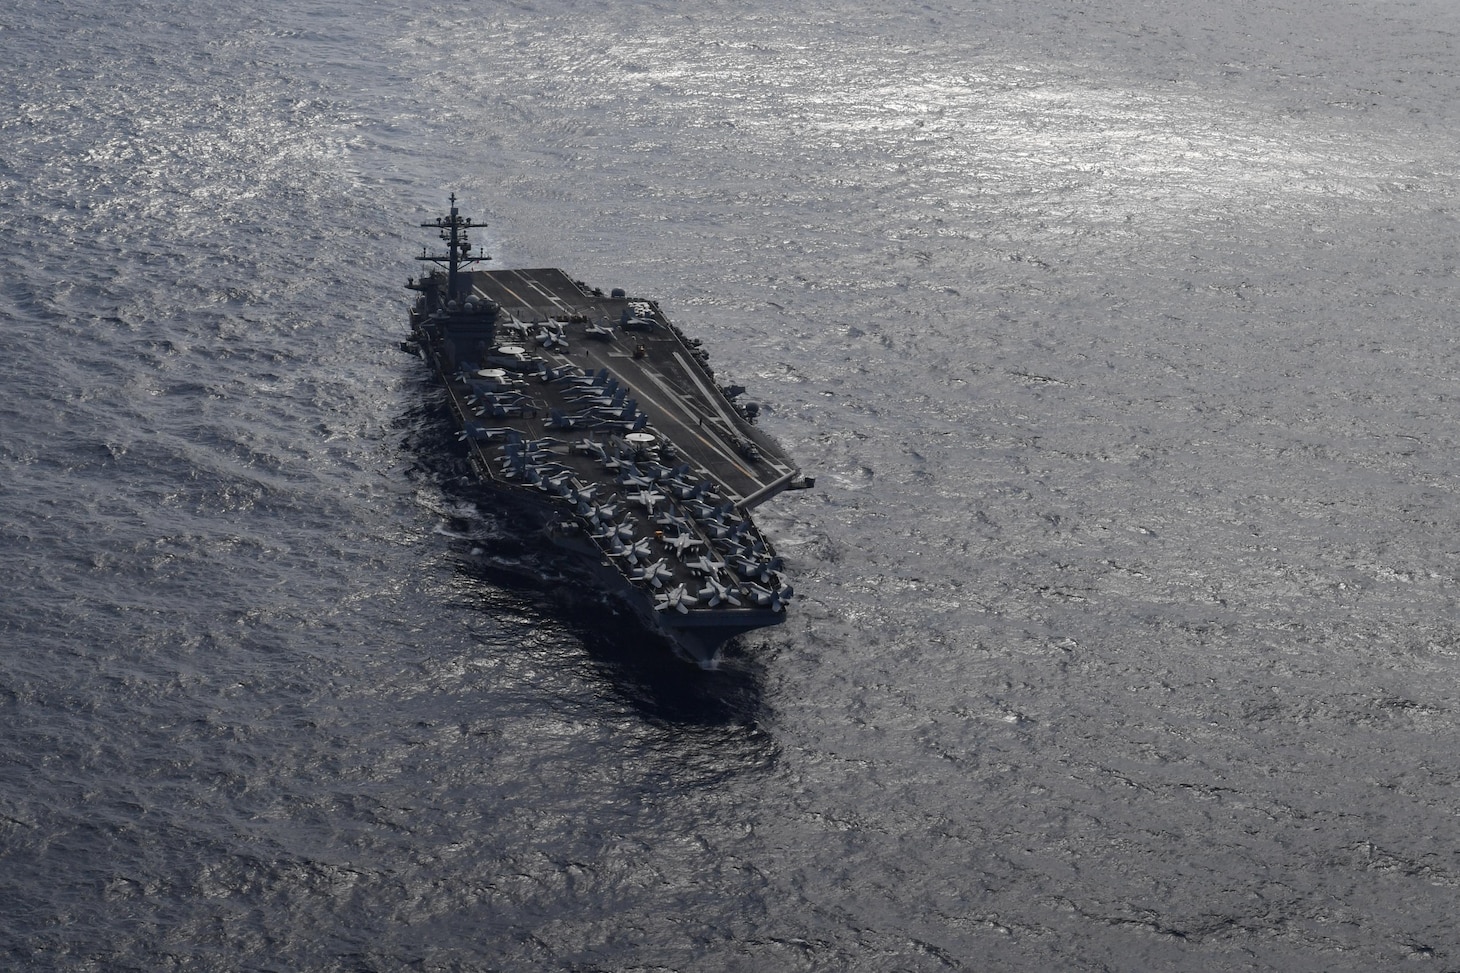 File photo: PACIFIC OCEAN (Nov. 9, 2017) The aircraft carrier USS Theodore Roosevelt (CVN 71) transits the Pacific Ocean. Theodore Roosevelt is underway for a regularly scheduled deployment to the U.S. 7th Fleet area of operations in support of maritime security operations and theater security cooperation efforts.